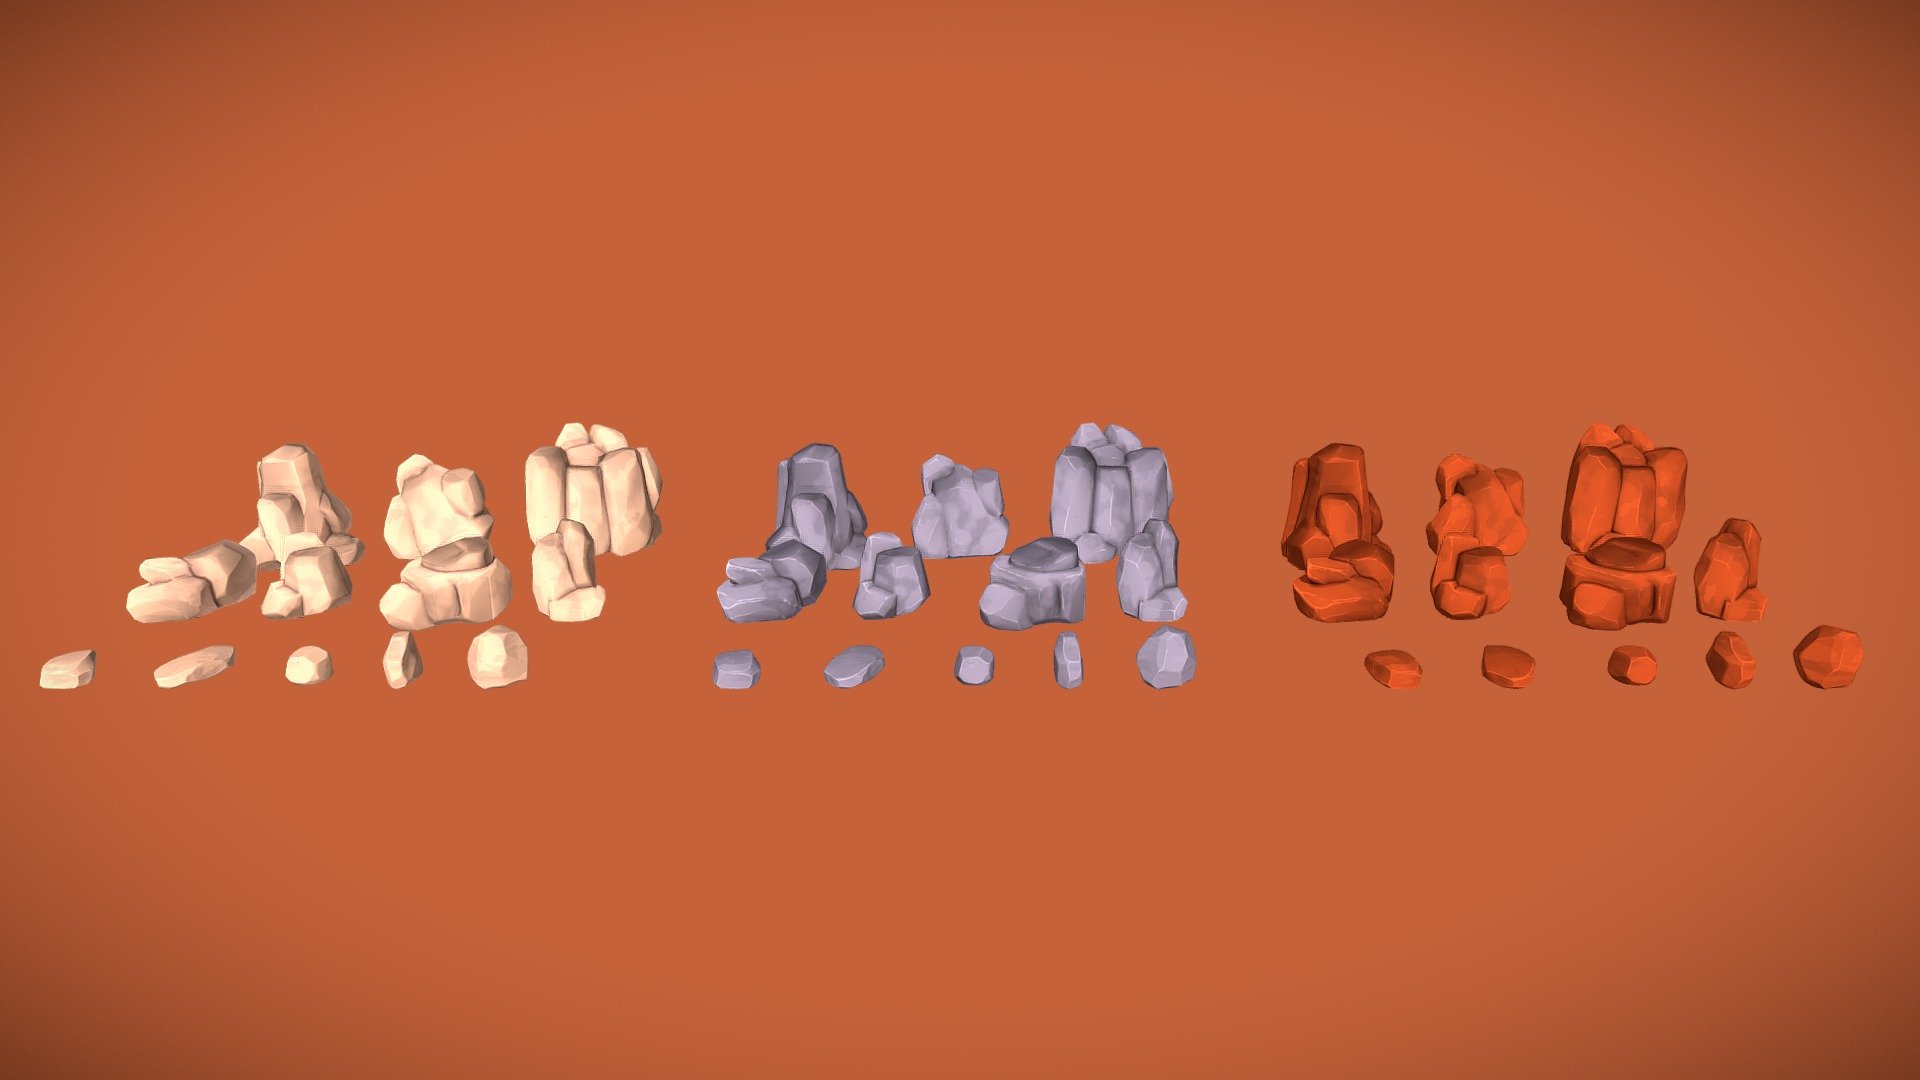 Stylized rocks with a hand painted/ painterly look.

Contains 12 rock meshes with 3 color variations and normal maps ready to use.

CONTENTS:

12 meshes




small rock 1 (103 verts)

small rock 2 (103 verts)

small rock 3 (108 verts)

small rock 4 (97 verts)

small rock 5 (117 verts)

medium rock 1 (165 verts)

medium rock 2 (165 verts)

medium rock 3 (177 verts)

medium rock 4 (177 verts)

big rock 1 (302 verts)

big rock 2 (269 verts)

big rock 3 (330 verts)

8 materials (Unity &amp; Godot)




small rocks x1

medium rocks x4

big rocks x3

32 textures(2048px)




big rocks normals x3

medium rocks normals x4

small rocks normals x1

big rocks albedo (grey, desert, sand) x9

medium rocks albedo (grey, desert, sand) x12

small rocks albedo (grey, desert, sand) x3

Included packages:




fbx

glb

unity

godot

blend

textures
 - Adventurous - Rocks & Stones - Buy Royalty Free 3D model by silverdelivery 3d model